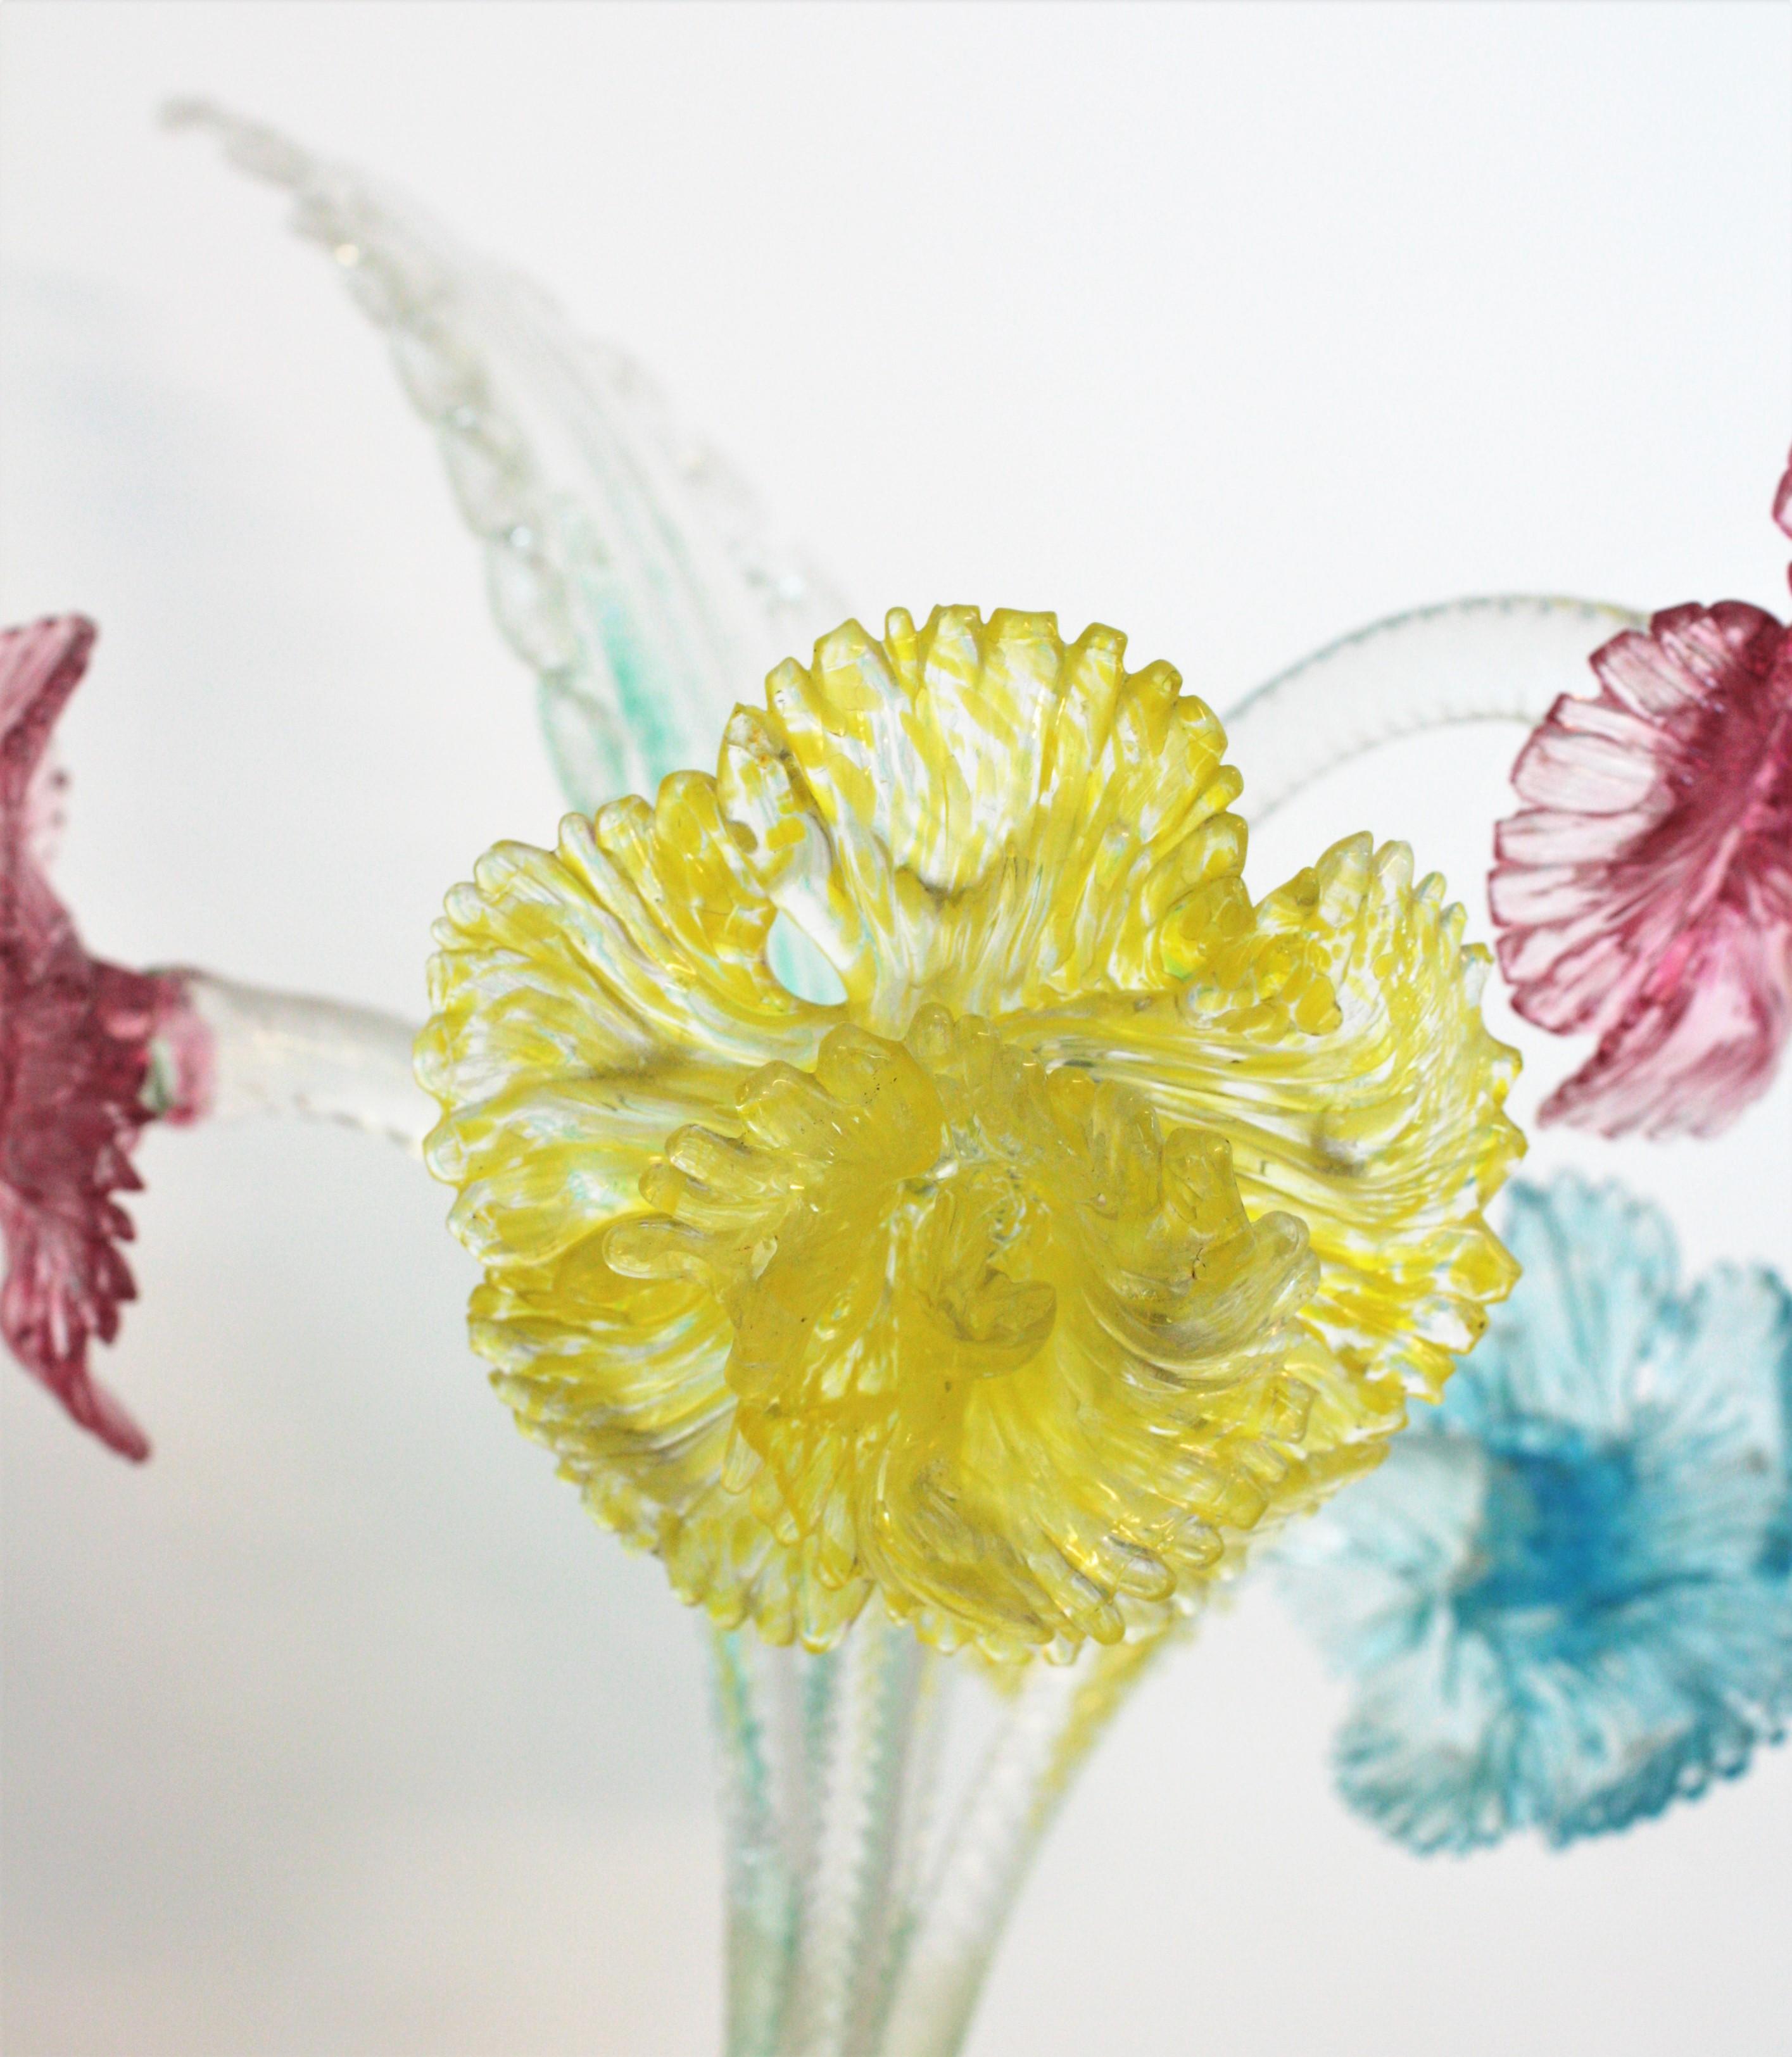 Outstanding Large Bouquet of Murano Blown Glass Flowers. Italy, 1920s.
This colorful set is comprised by 5 long stem flowers in yellow, pink and blue and one large leave. The stems are made in clear glass with swirl ribbon details.
Place them in a